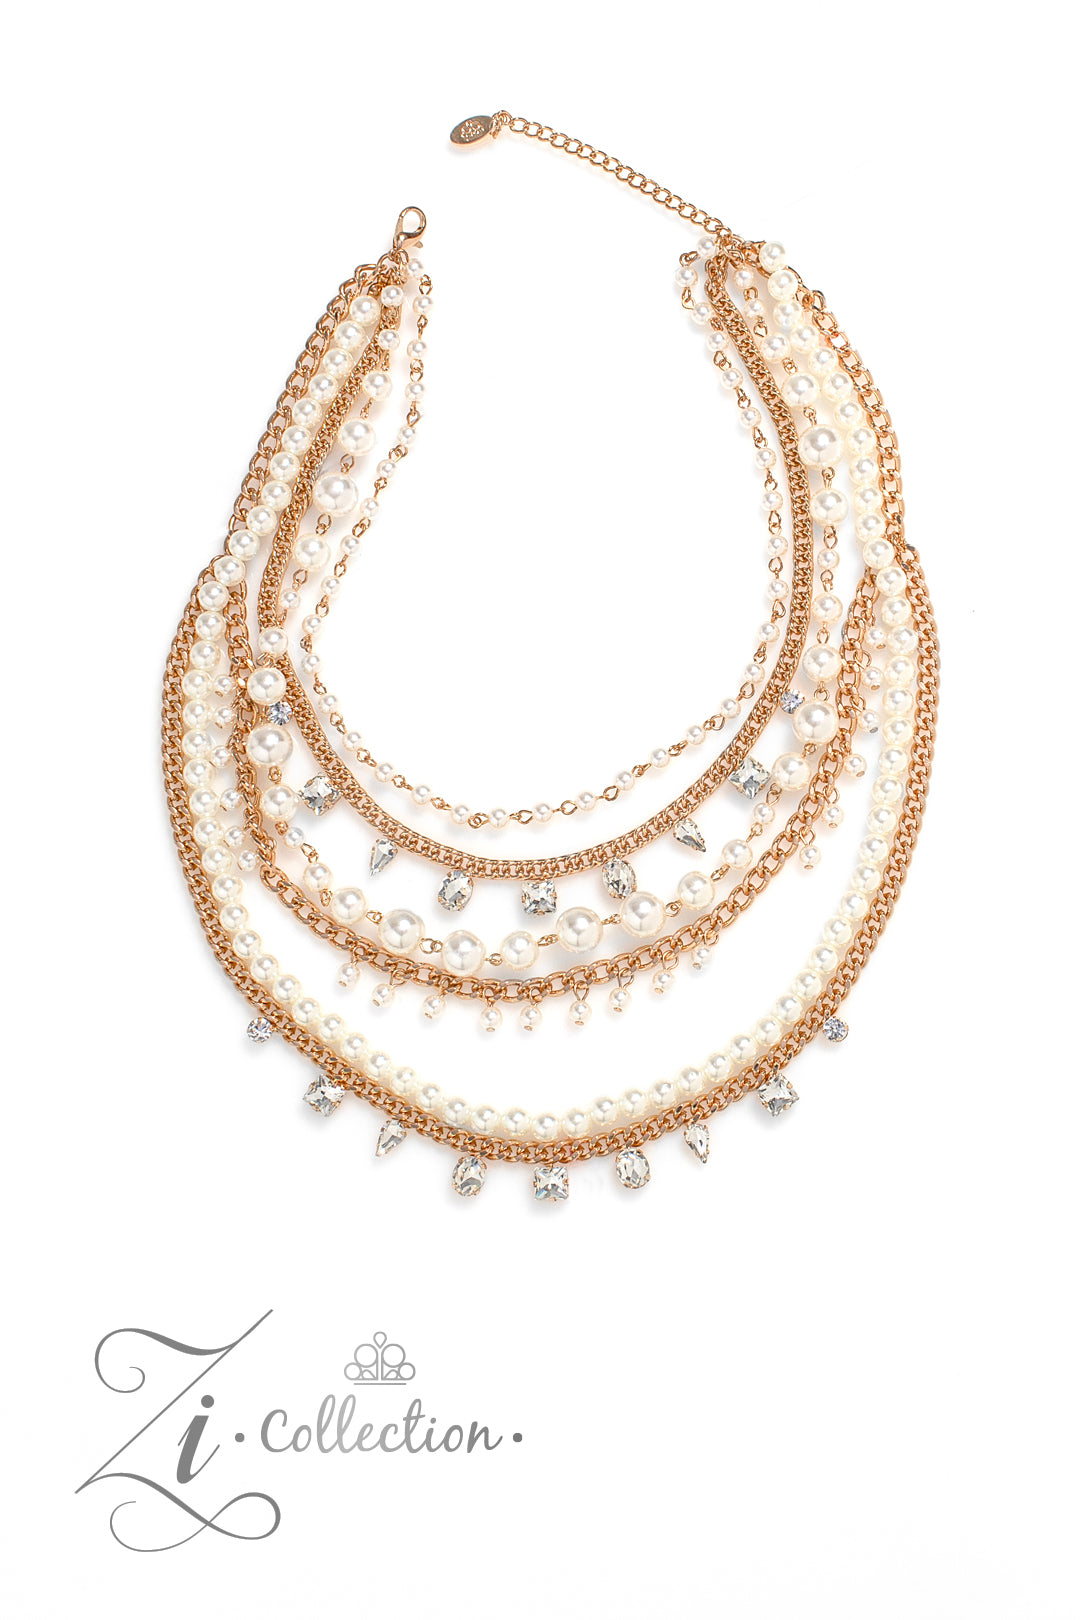 Aristocratic Gold 2023 Zi Collection Necklace - Paparazzi Accessories  A mismatched collection of gold chains is layered with strands of pearly white beads to create luminous layers with charismatic chaos. Faceted white gems in an assortment of shapes are sporadically sprinkled along sections of the gold chains, adding dramatic flashes of glitz among the mashup of textures. Features an adjustable clasp closure.